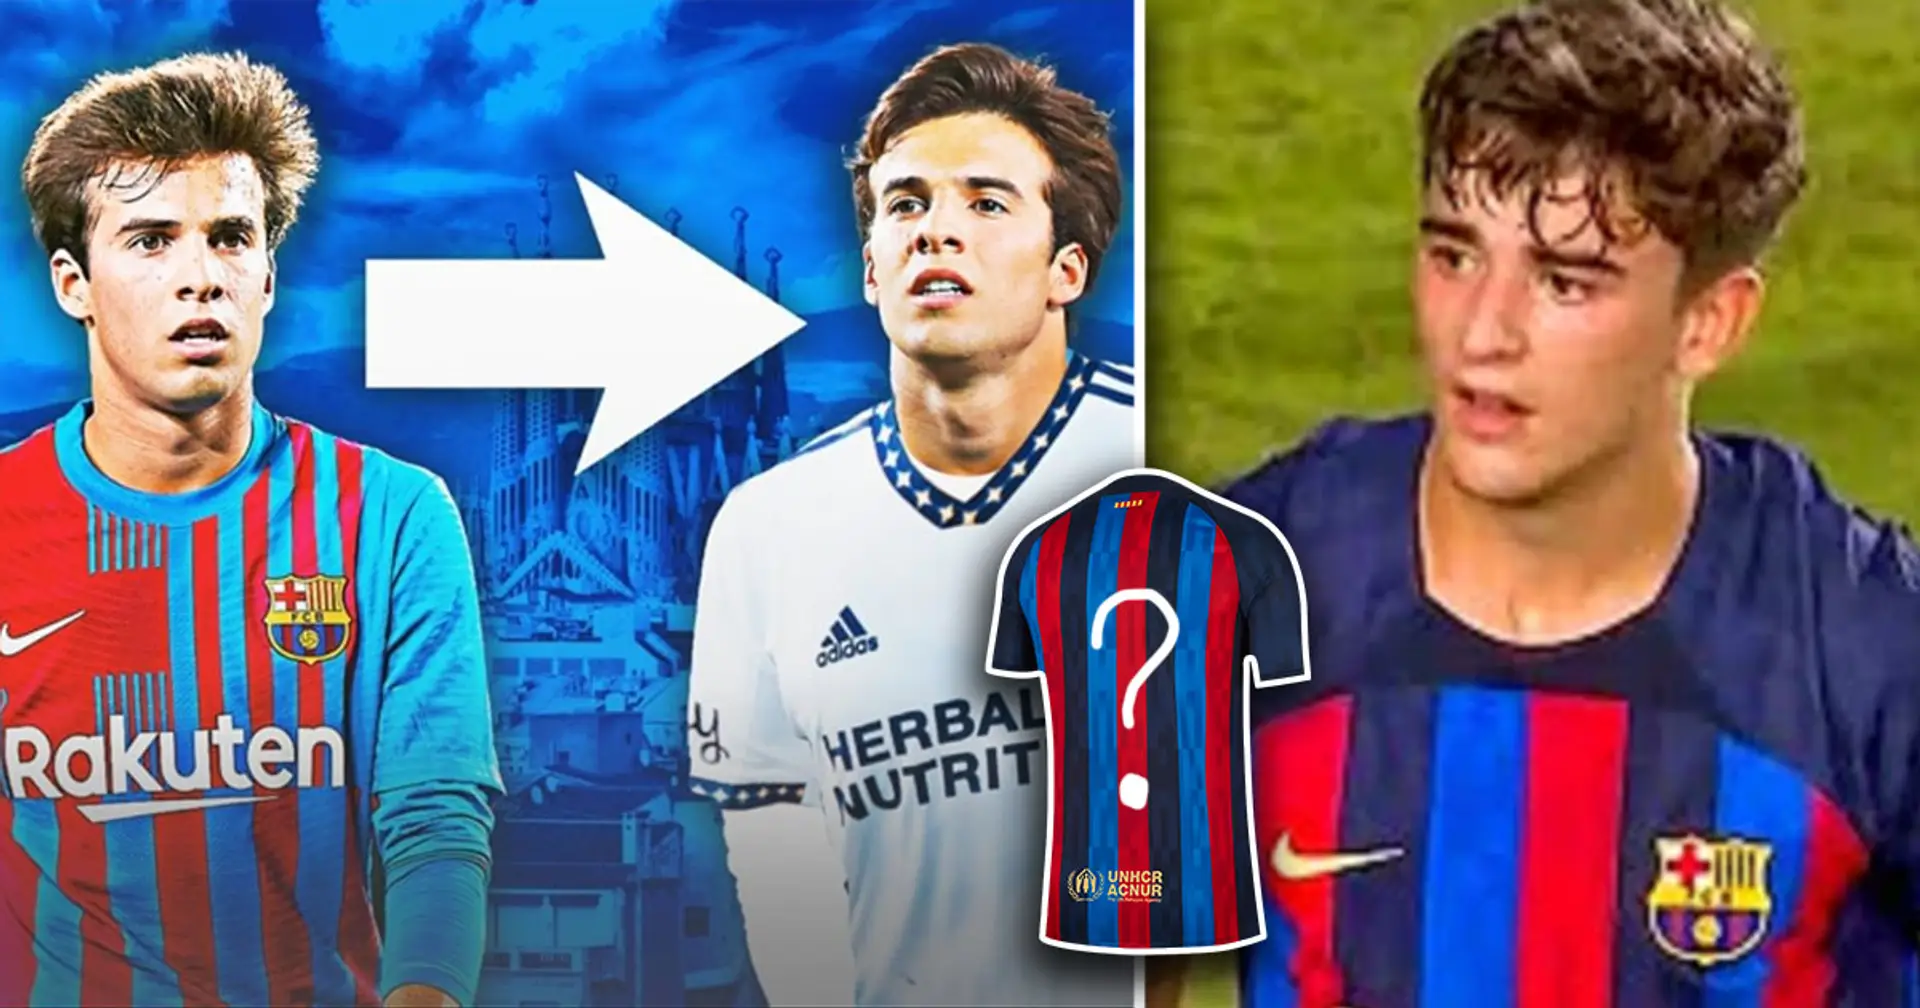 Riqui Puig exit means Gavi will soon get new jersey number